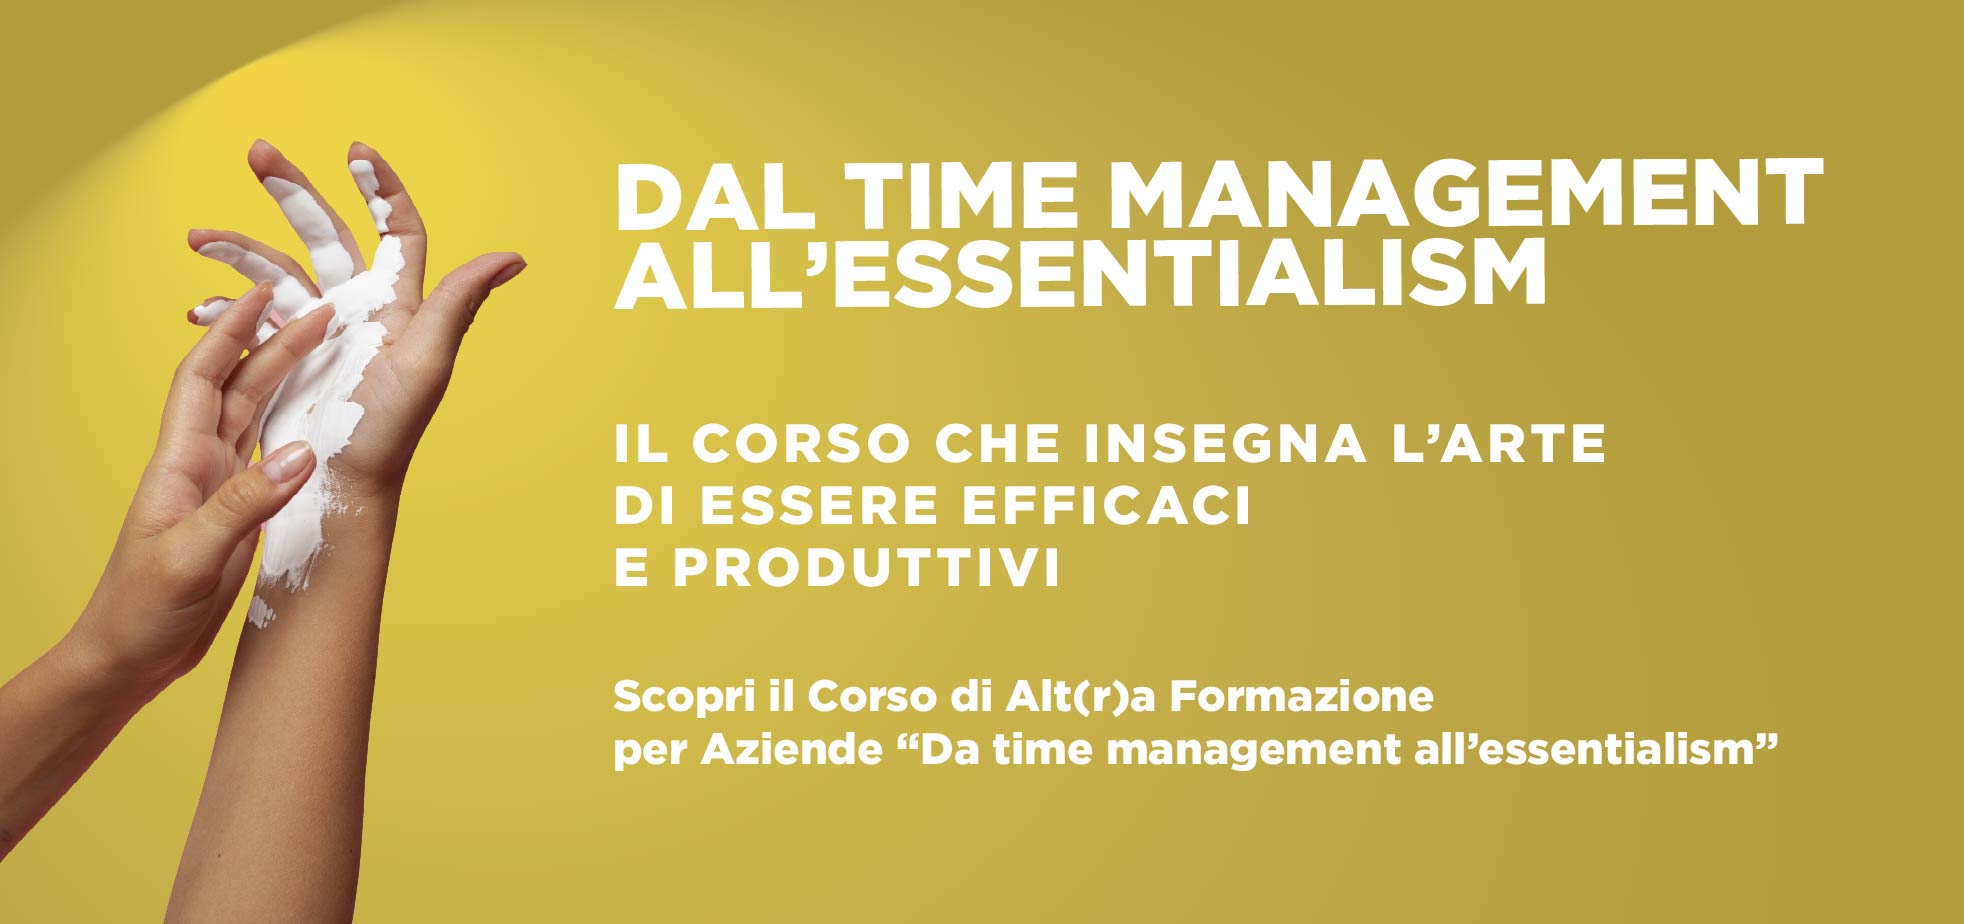 Dal time management all’essentialism